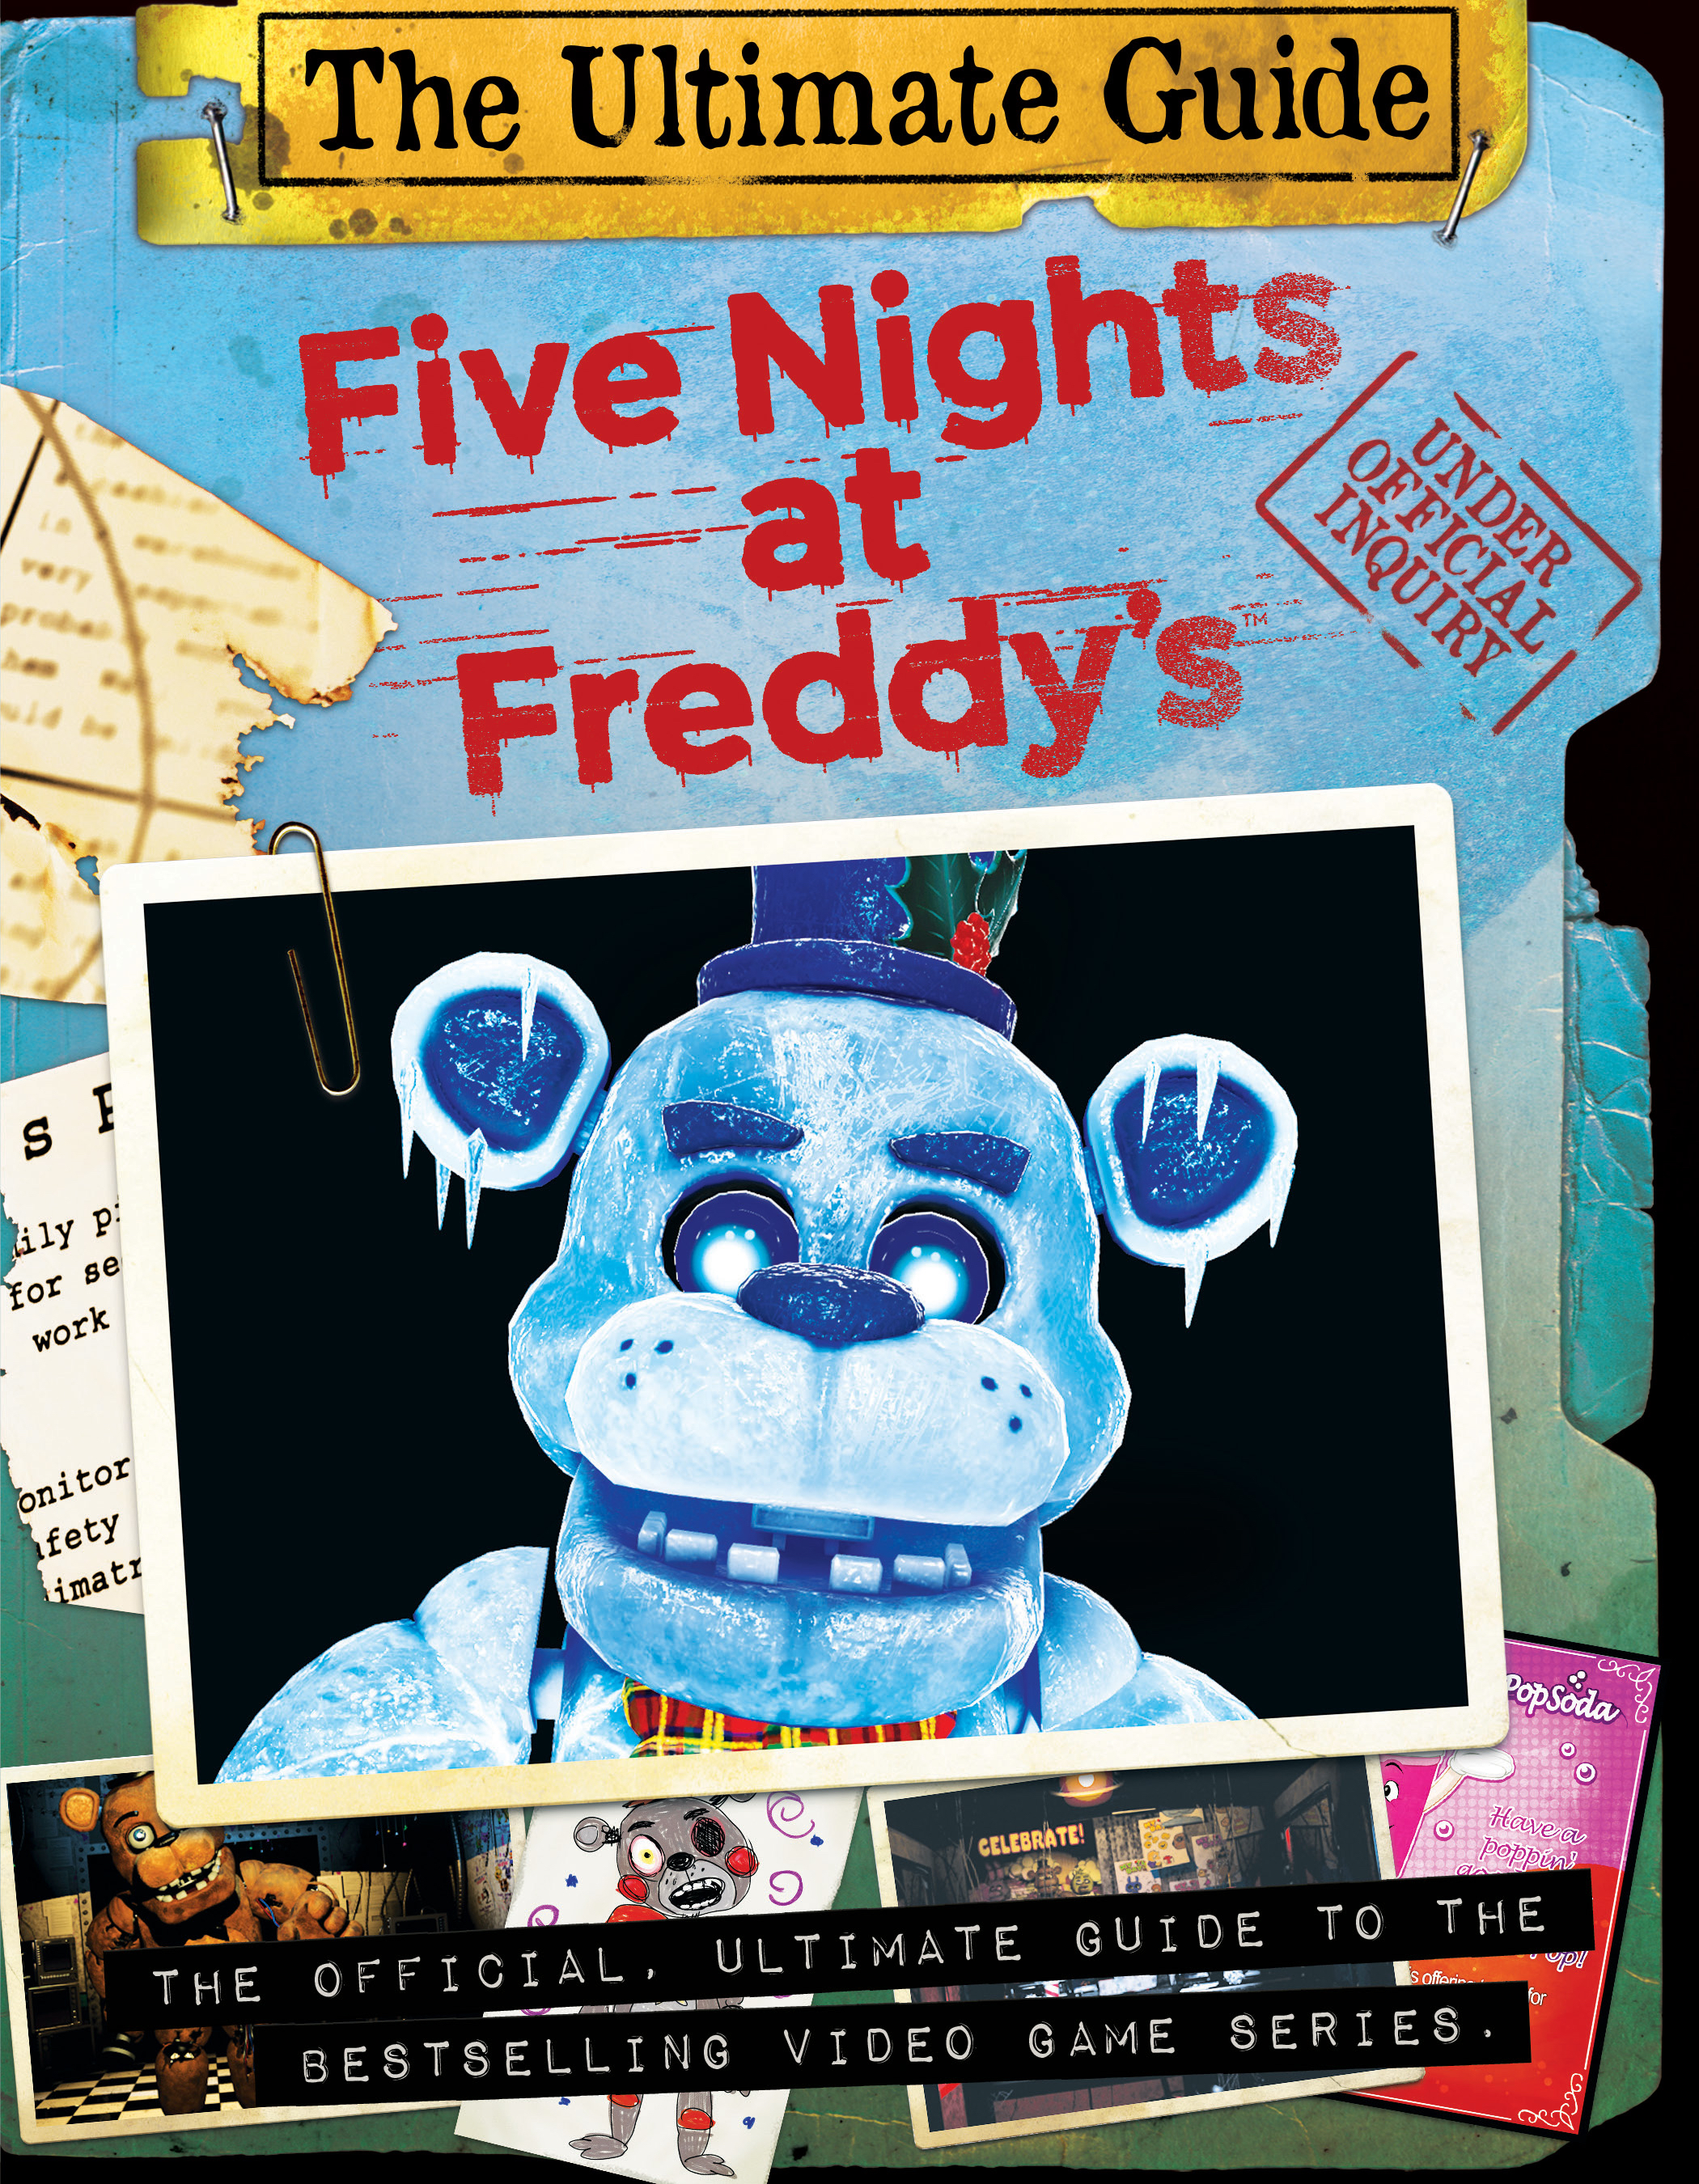 The Freddy Files Five Nights At Freddy's Pages 1-50 - Flip PDF